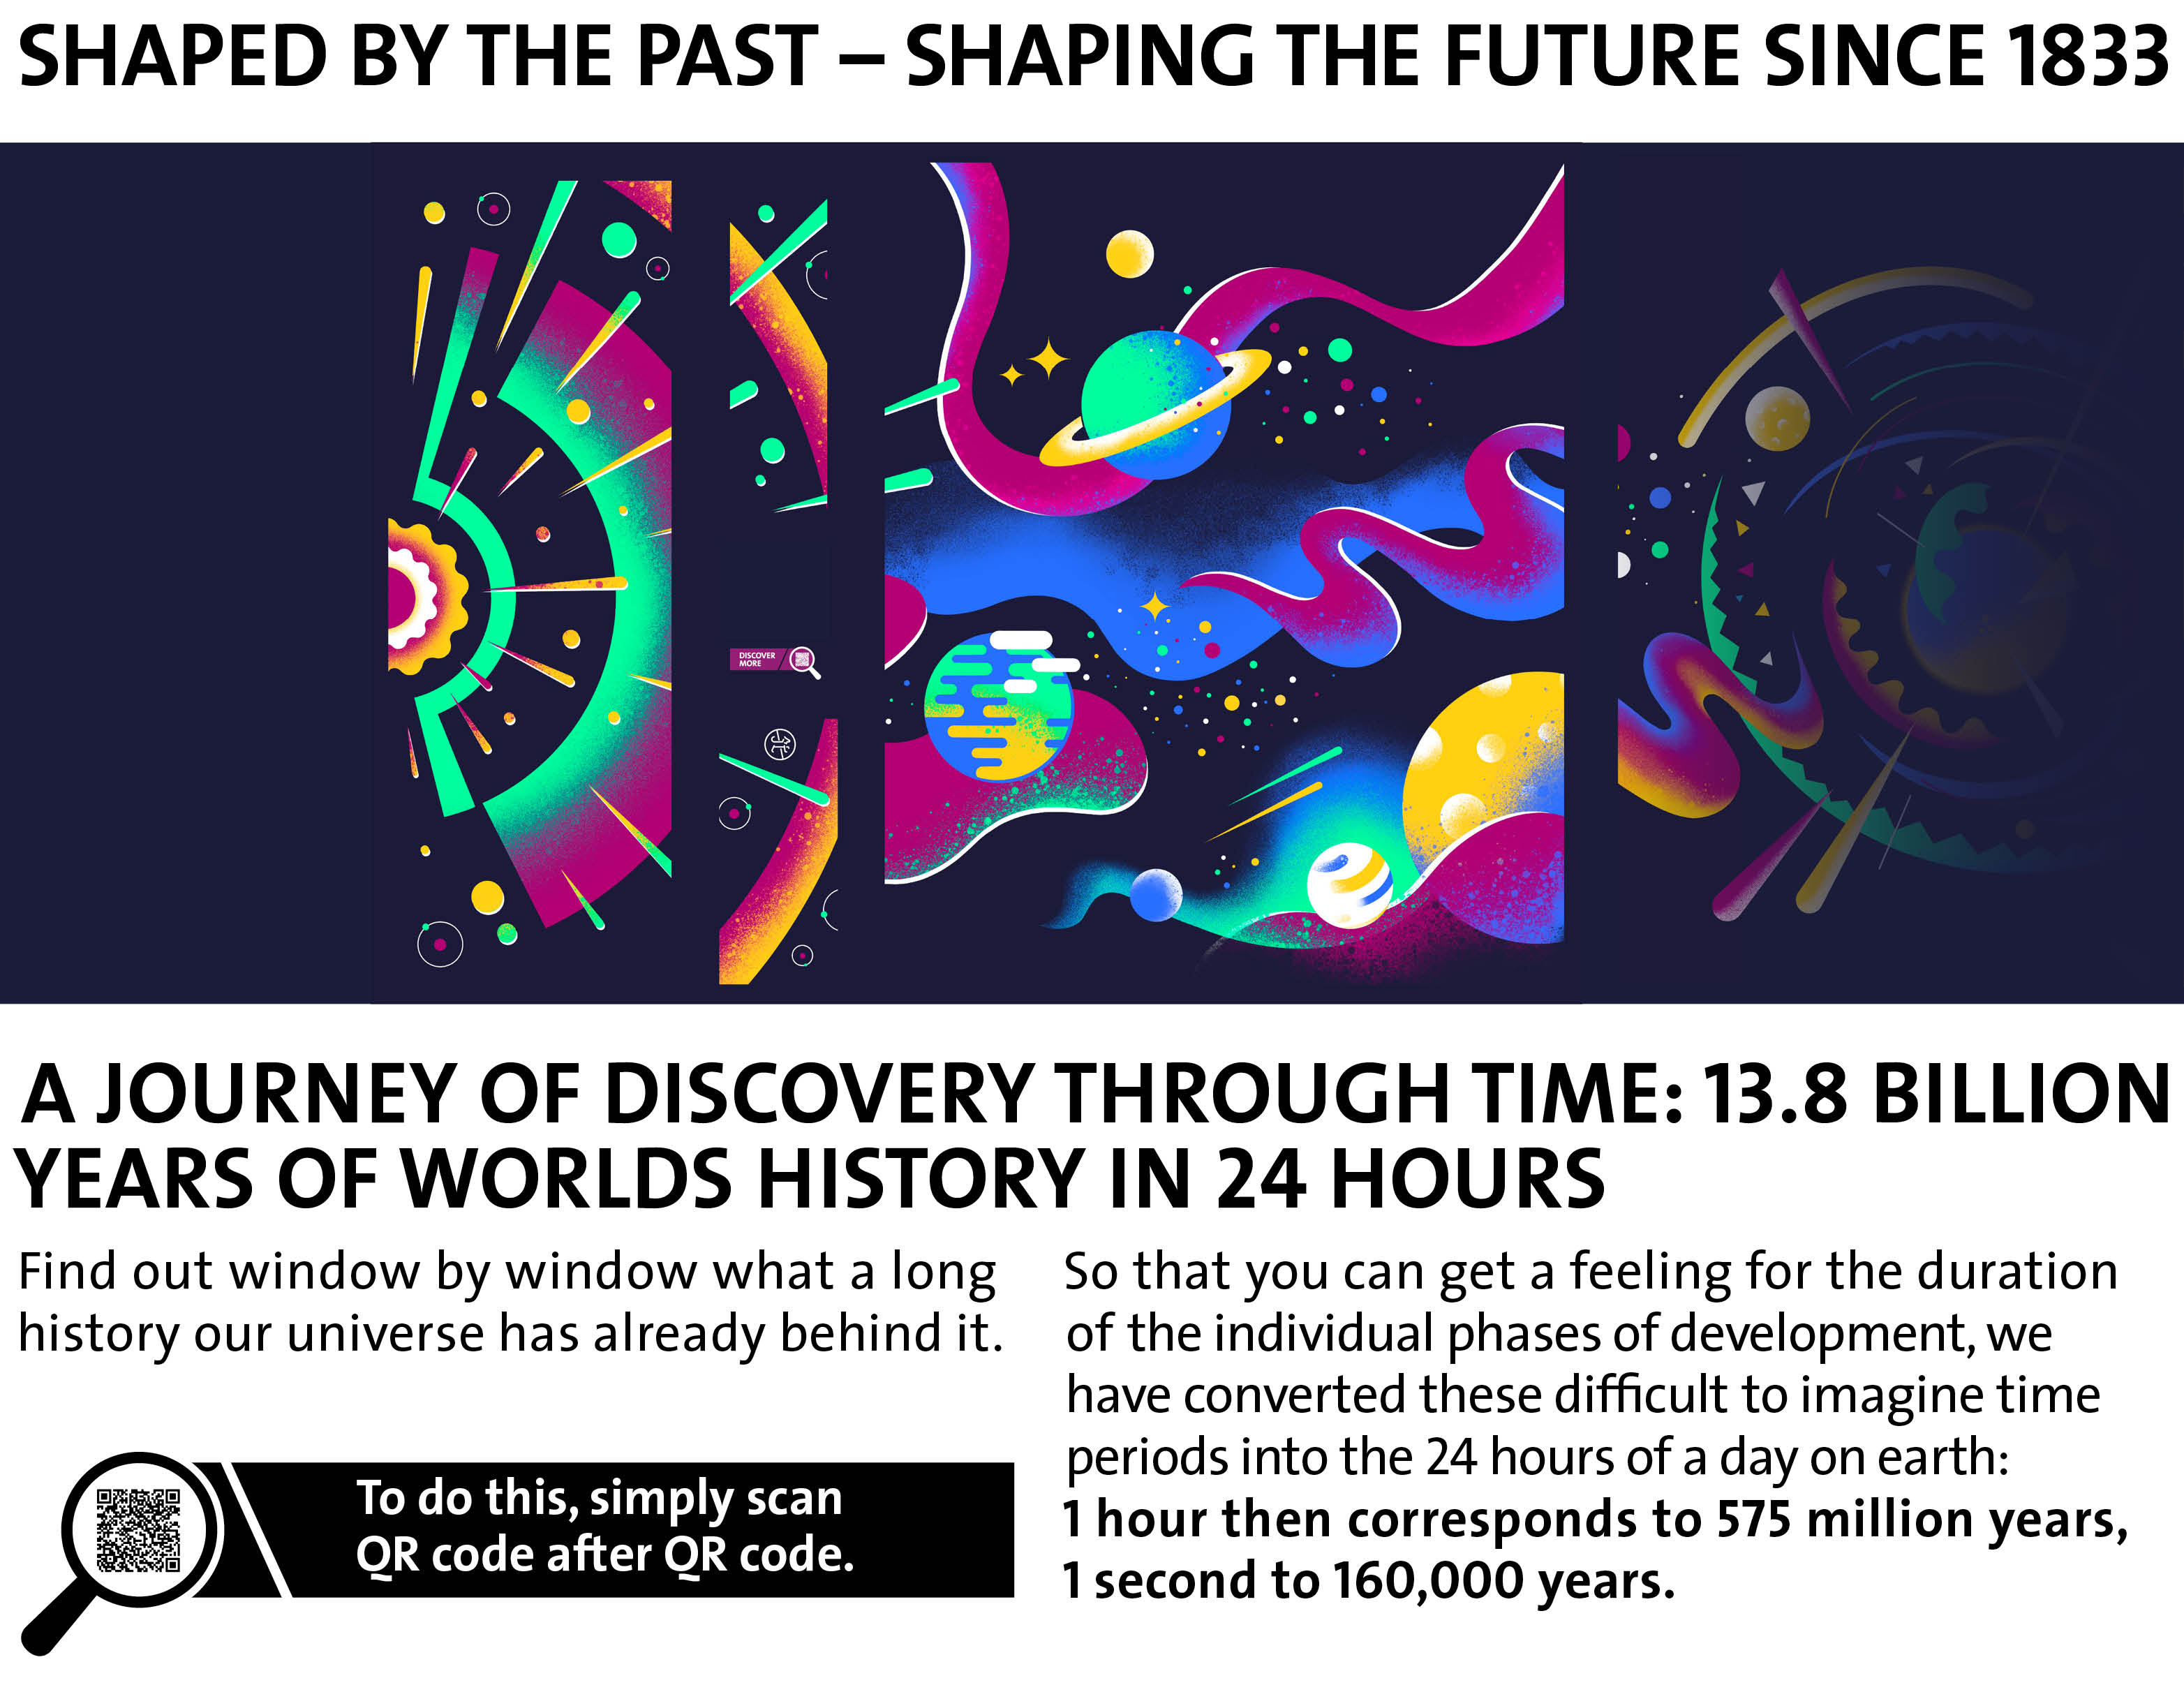 A journes of Discovery through time: 13.8 billion years of worlds history in 24 hours. Find out window by window what a long history our universe has already behind it. So that you can get a feeling for the duration of the individual phases of development, we have converted these difficult to imagine time periods into the 24 hours of a day on earth: 1 hour then corresponds to 575 million years, 1 second to 160,000 years.